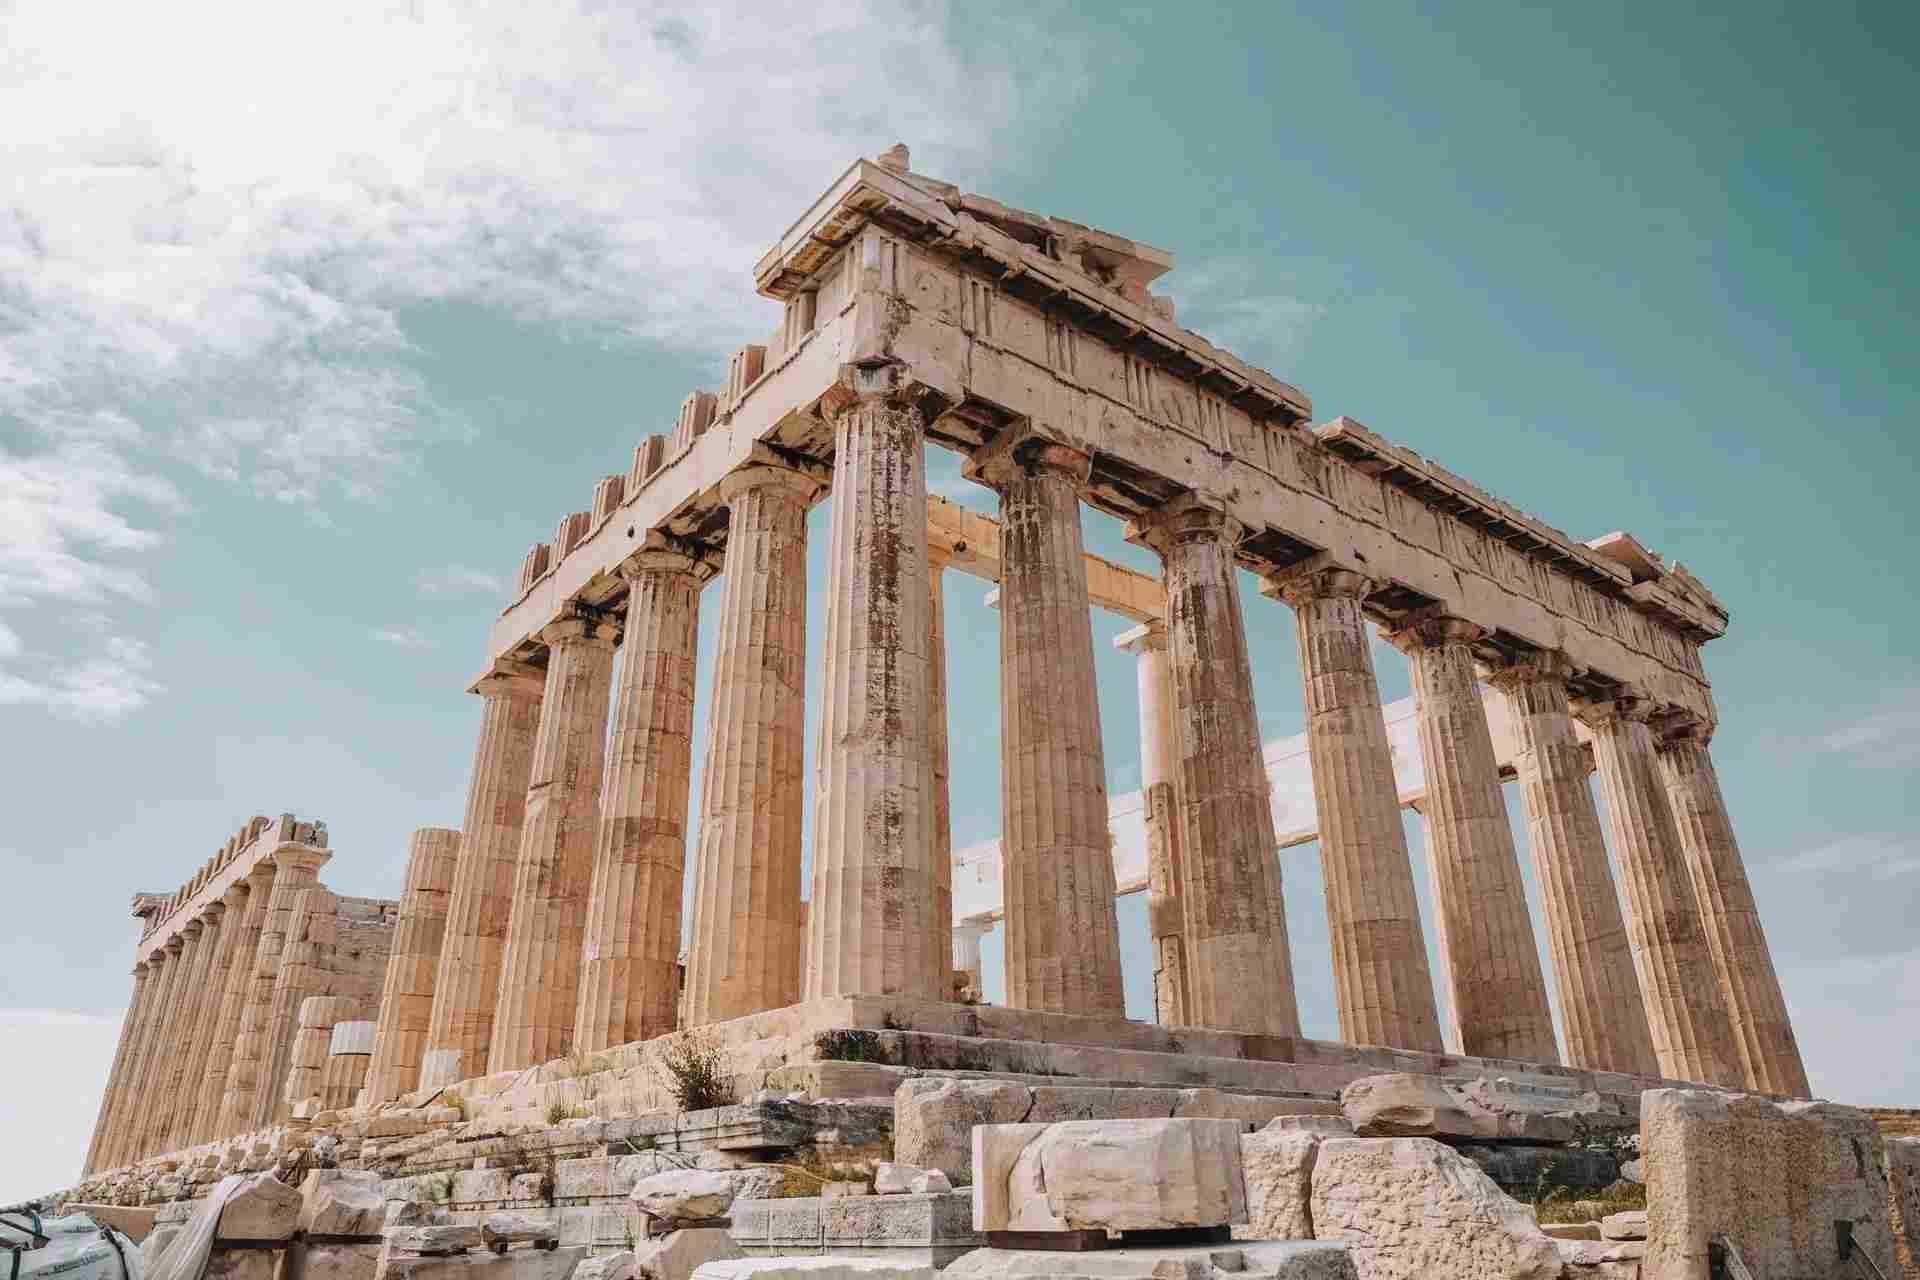 Two city-states would often fight a war in ancient Greece.